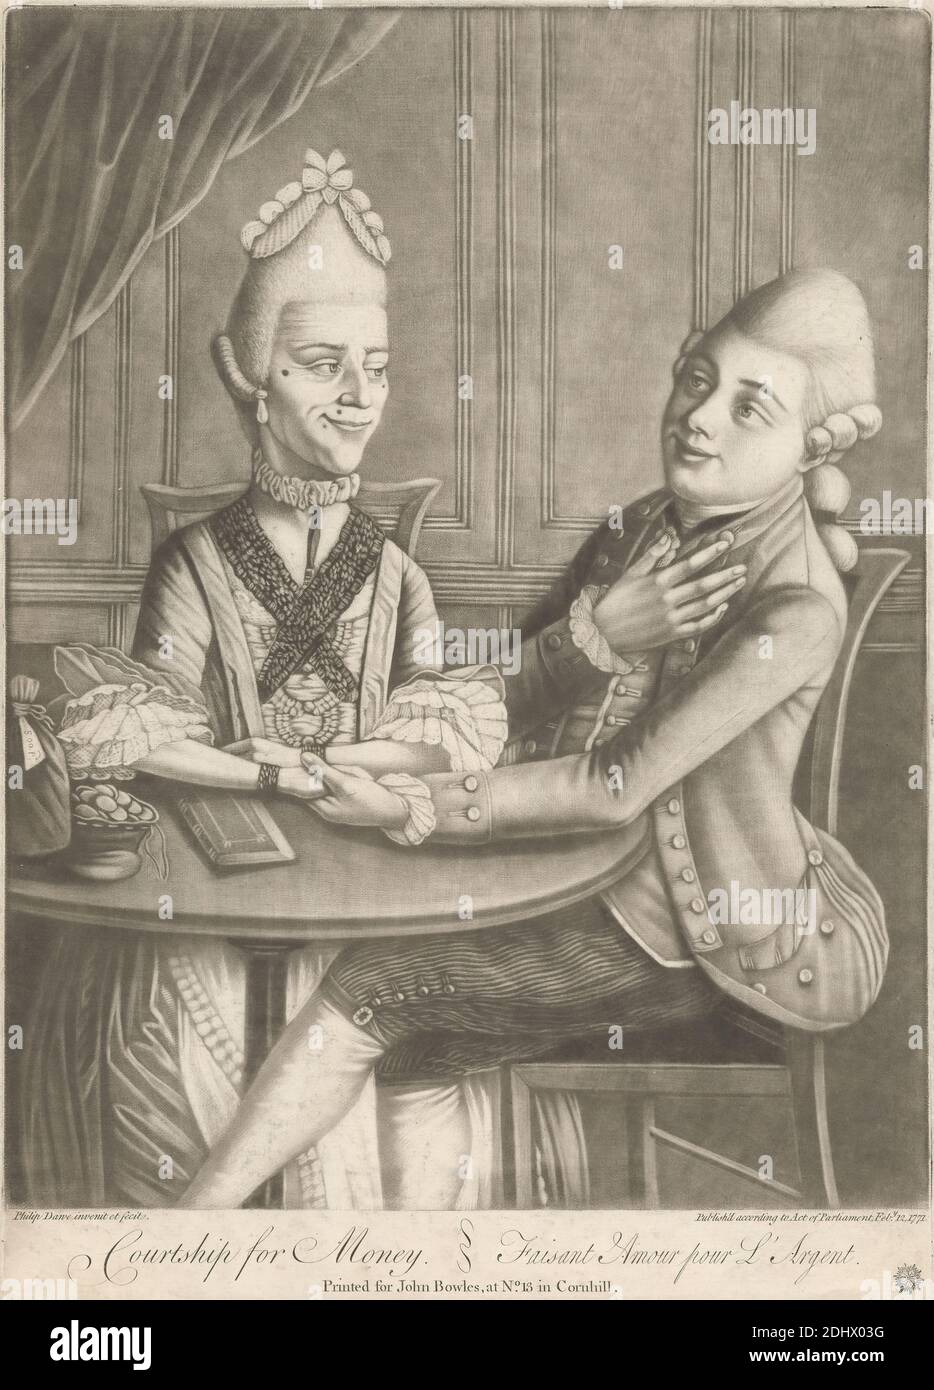 Courtship for Money, Print made by Philip Dawe, ca.1745–ca.1809, British, after Philip Dawe, ca.1745–ca.1809, British, Published by John Bowles, 1701–1779, British, 1771, Mezzotint on moderately thick, moderately textured, cream laid paper, Sheet: 14 1/4 x 10 7/16 inches (36.2 x 26.5 cm), Plate: 14 x 10 1/16 inches (35.5 x 25.5 cm), and Image: 13 x 10 1/16 inches (33 x 25.5 cm), bag (container), book, bow (costume accessory), caricature, chairs, choker, coat, coins, costume, curtains, drapery, earrings, fashion, flounces, genre subject, gesture, gown, headpiece, humor, interior, jewelry, lace Stock Photo